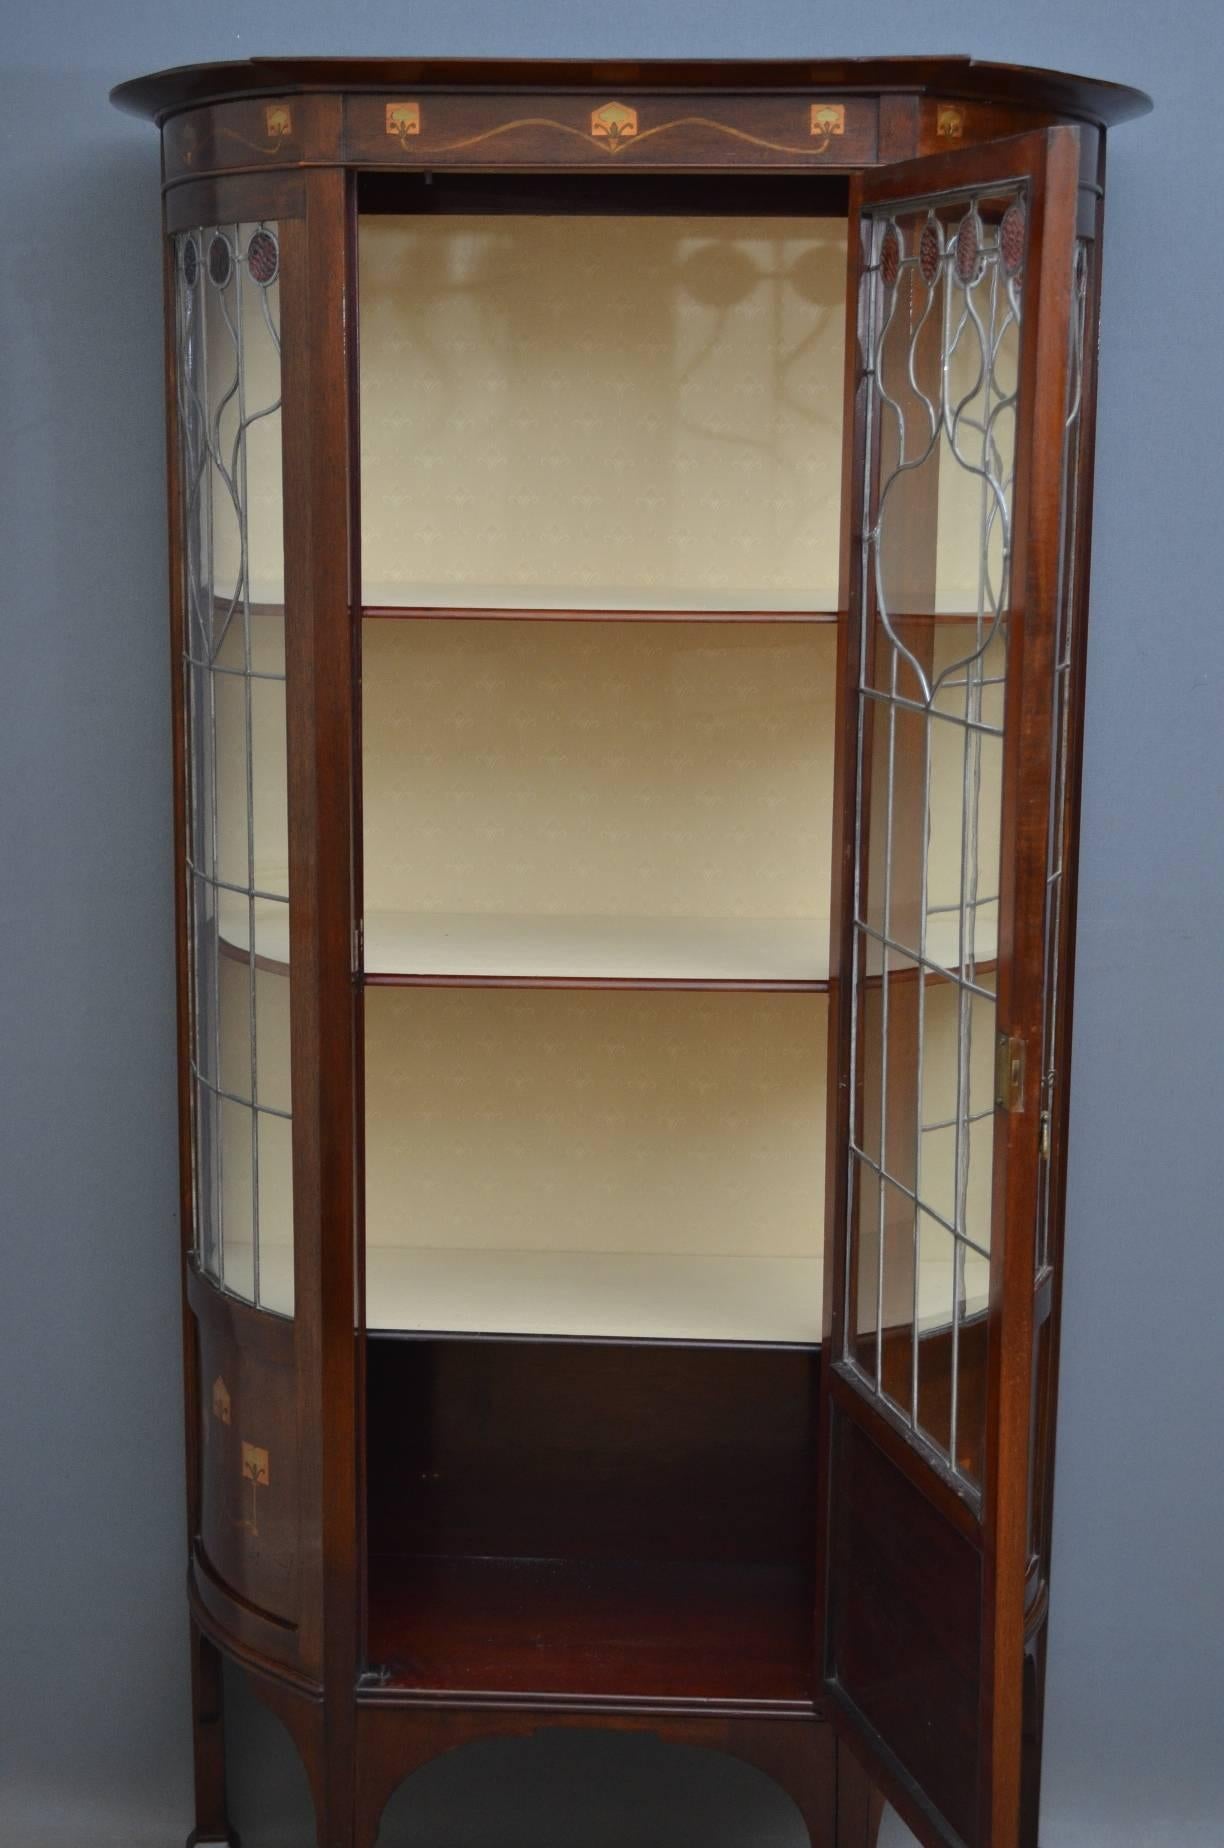 Sn4125 Art Nouveau mahogany display cabinet / vitrine, having outswept cornice with finely inlaid frieze, leaded glass door enclosing relined interior with three shelves and cupboard, all flanked by bowed glazed sides with panelled and inlaid